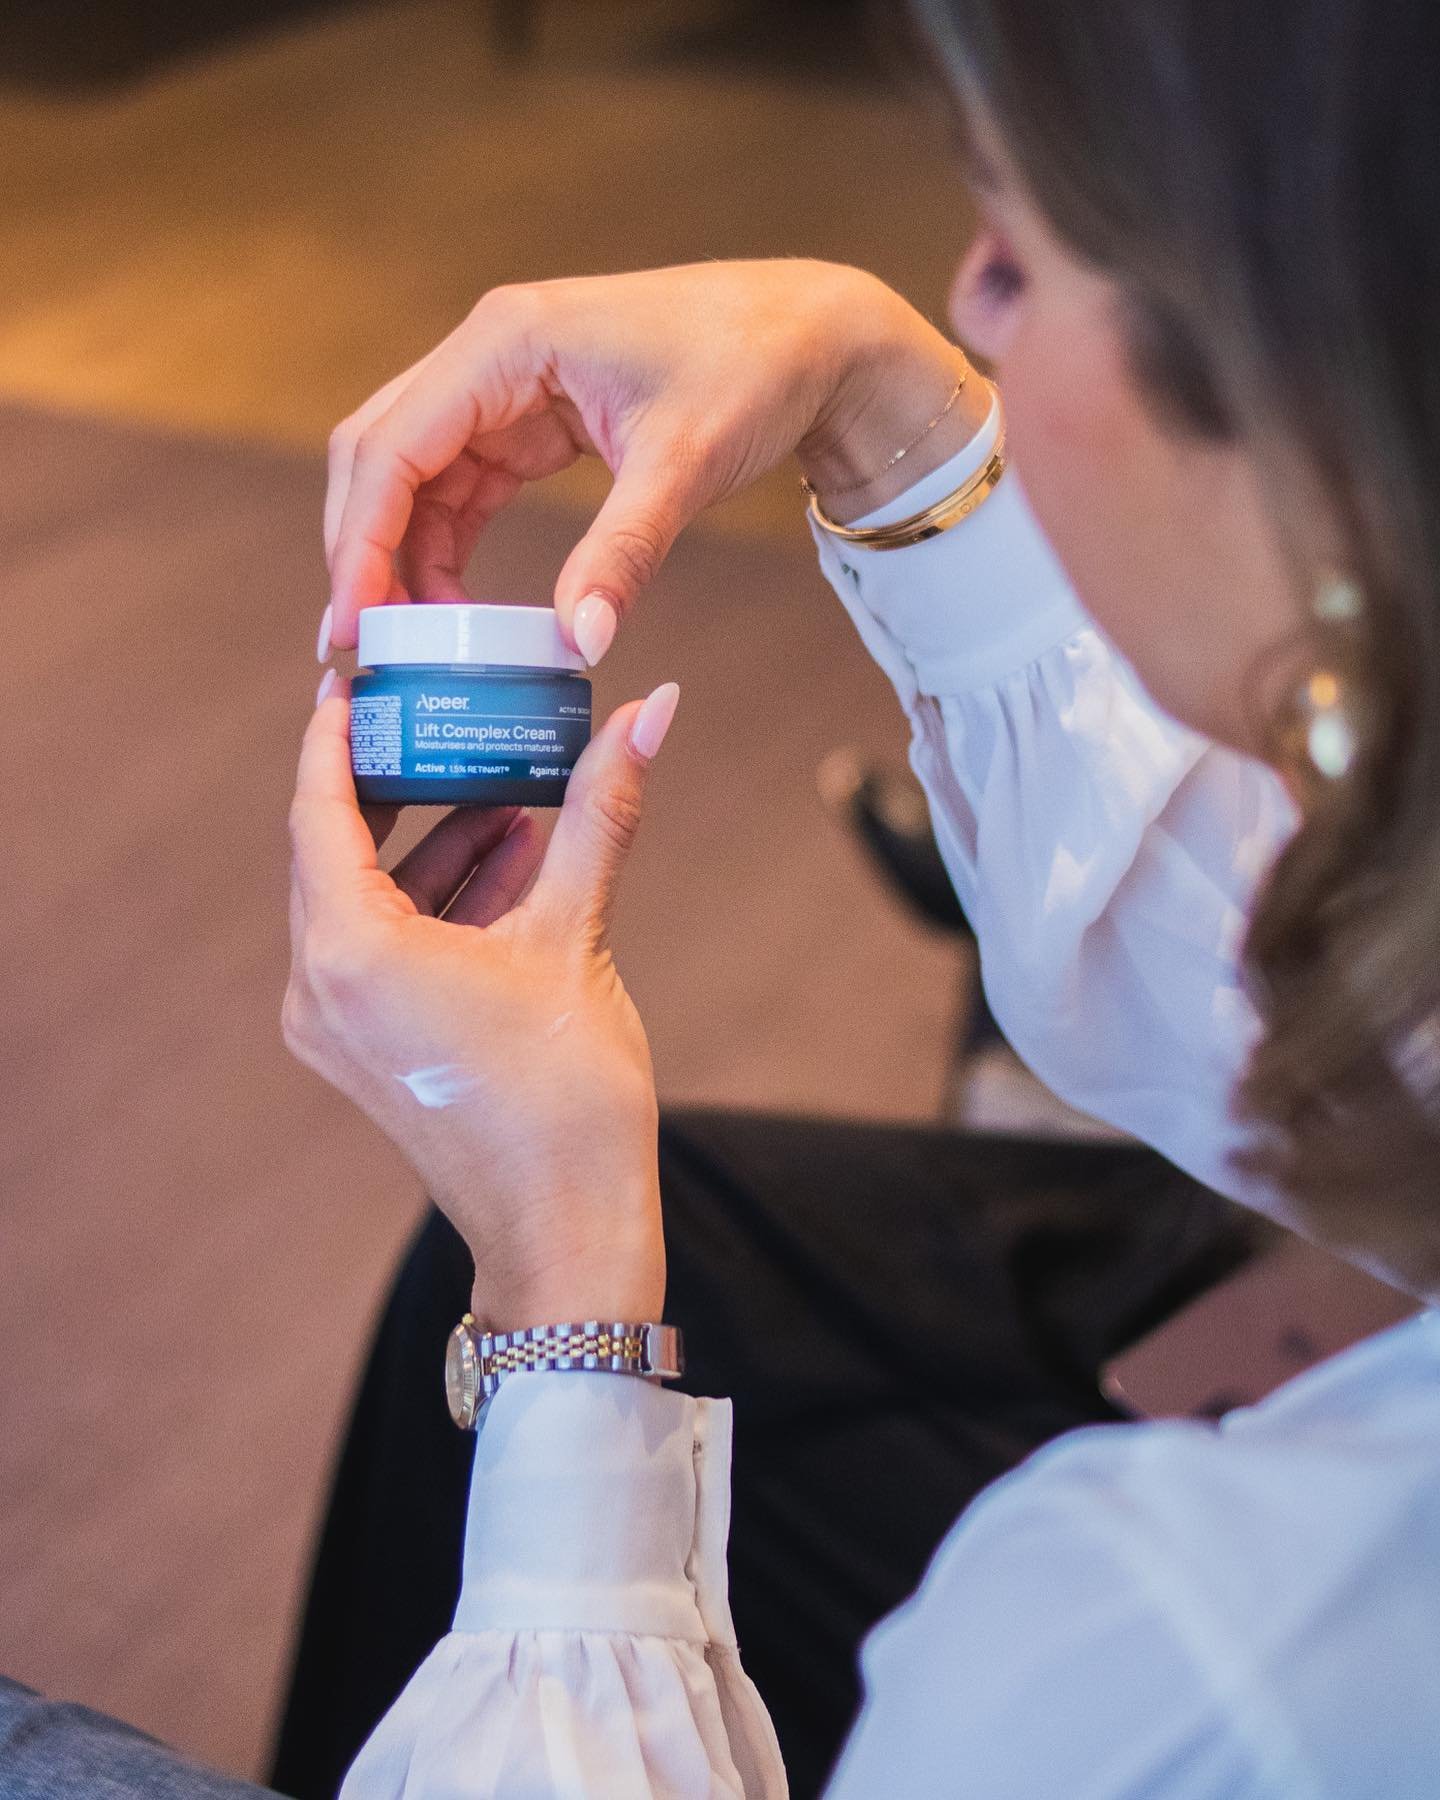 This time last week we were gearing up for the UK launch of Apeer Beauty, and their revolutionary Lift series with the newest &lsquo;it&rsquo; ingredient, RetinArt.

Swipe through to see the event content captured for @aspireskinco 

#beautyevents #r